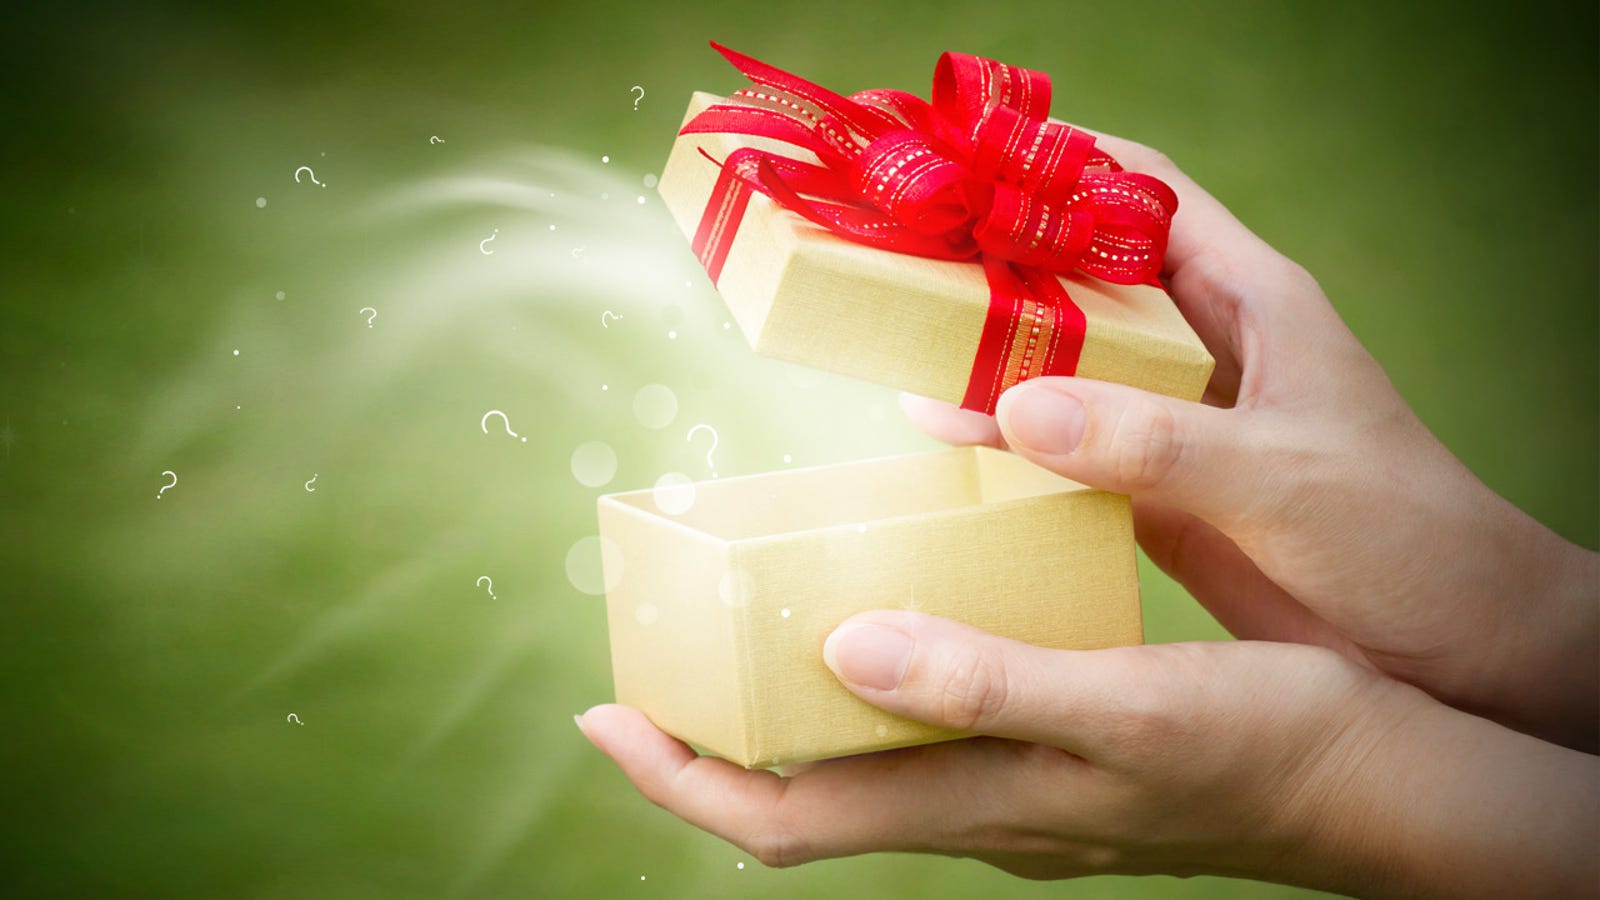 How Can I Give A Good Gift Without Being Cliché?